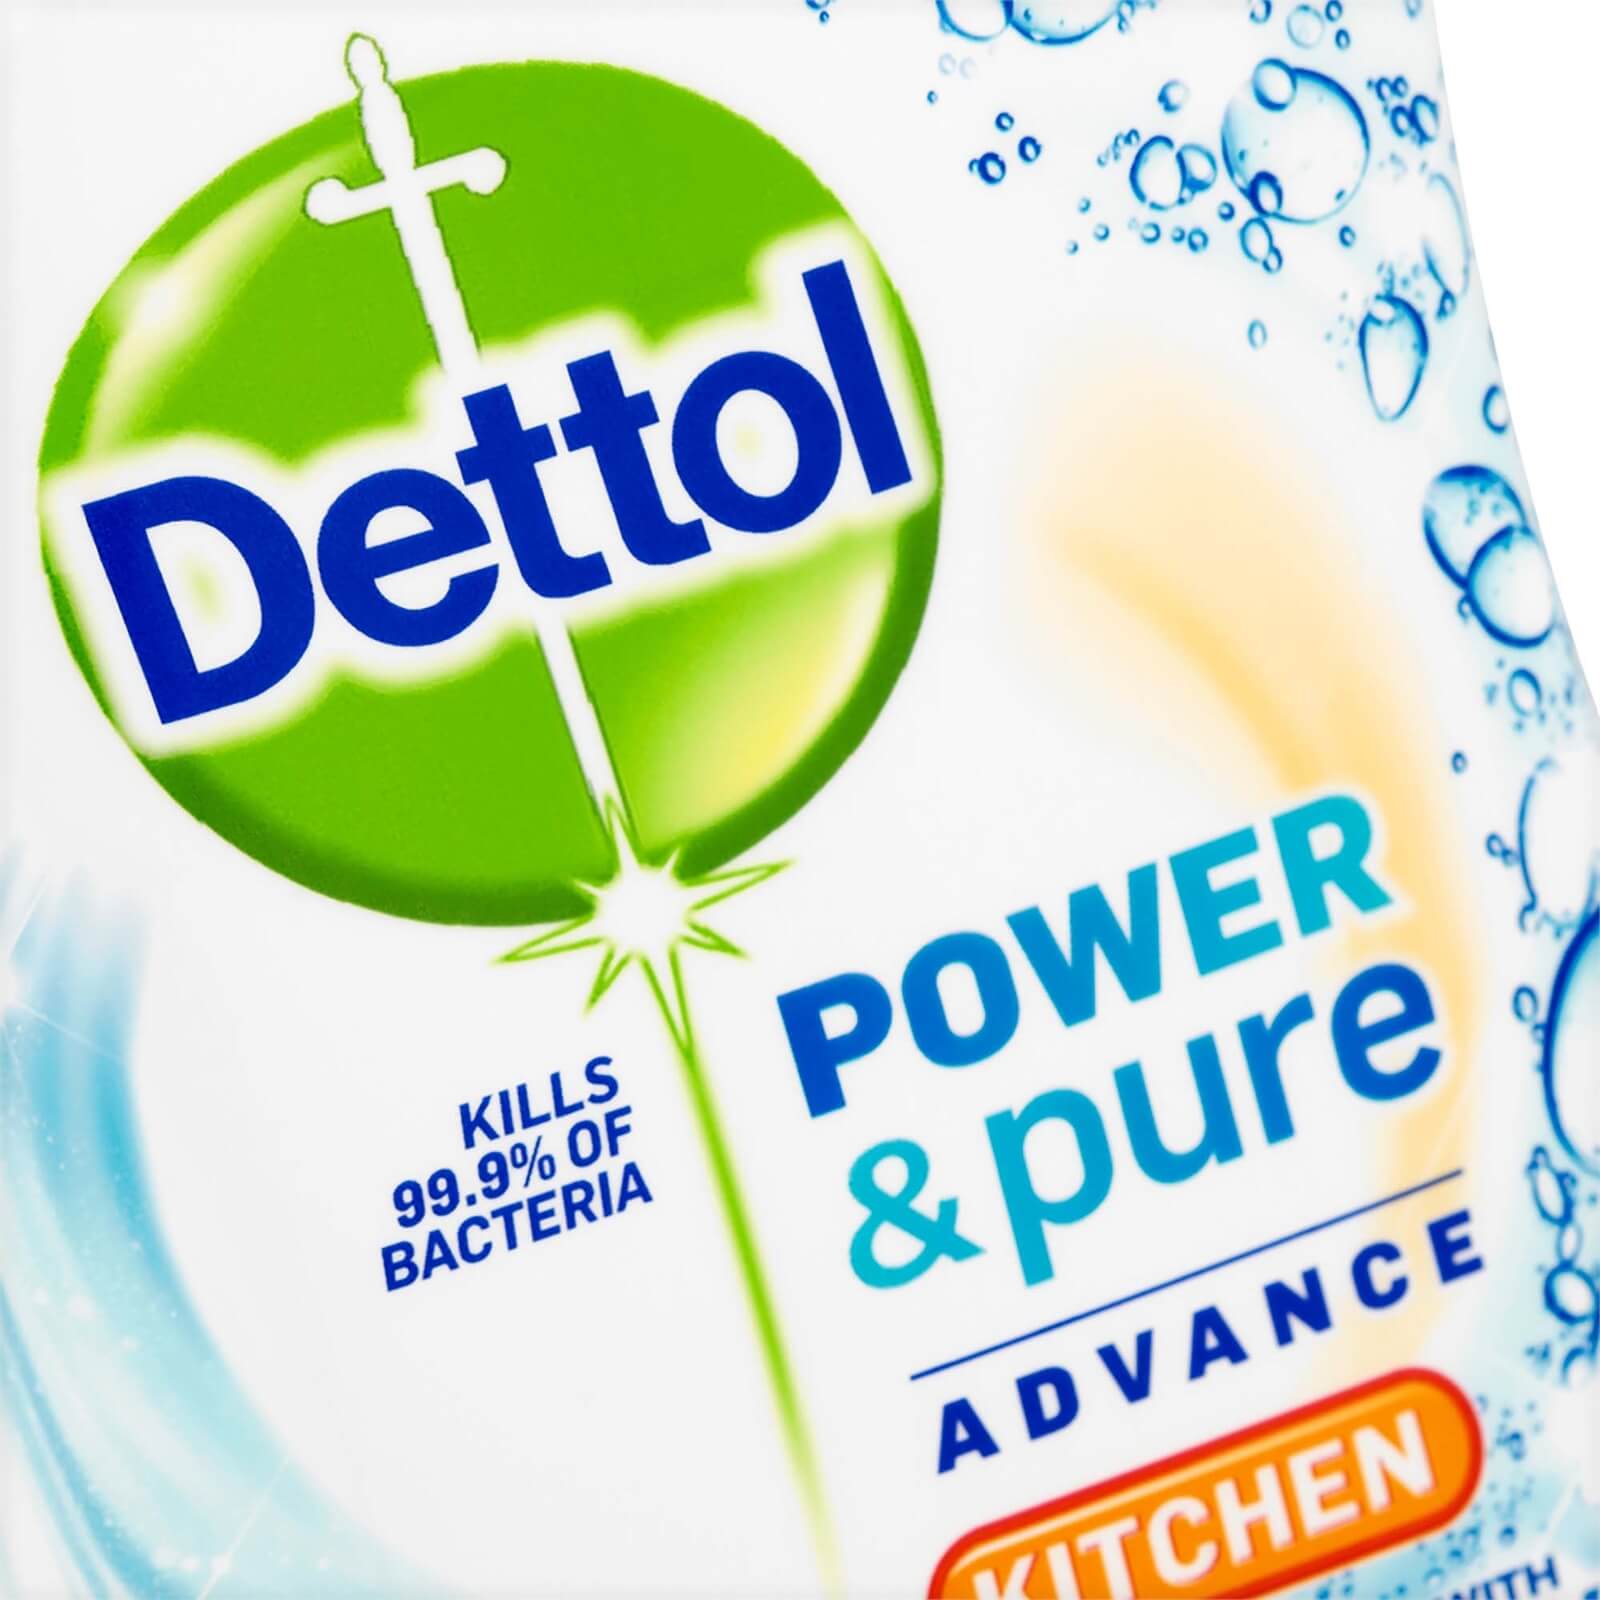 Dettol Power and Pure Kitchen Spray - 750ml